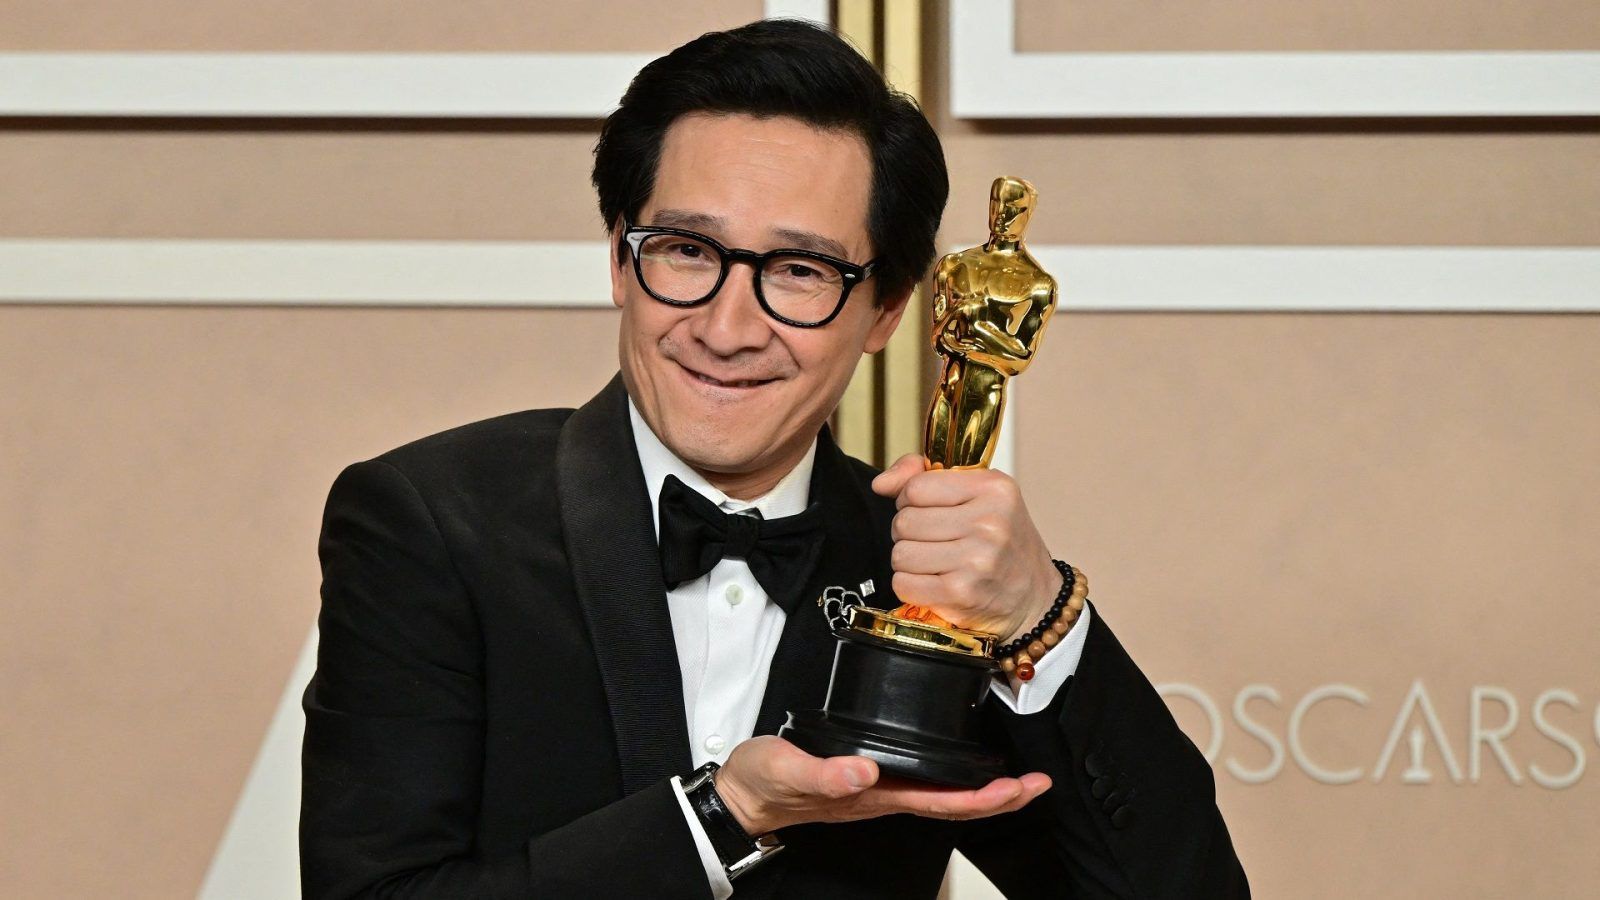 Oscars 2023 Ke Huy Quan wins Best Supporting Actor, makes history